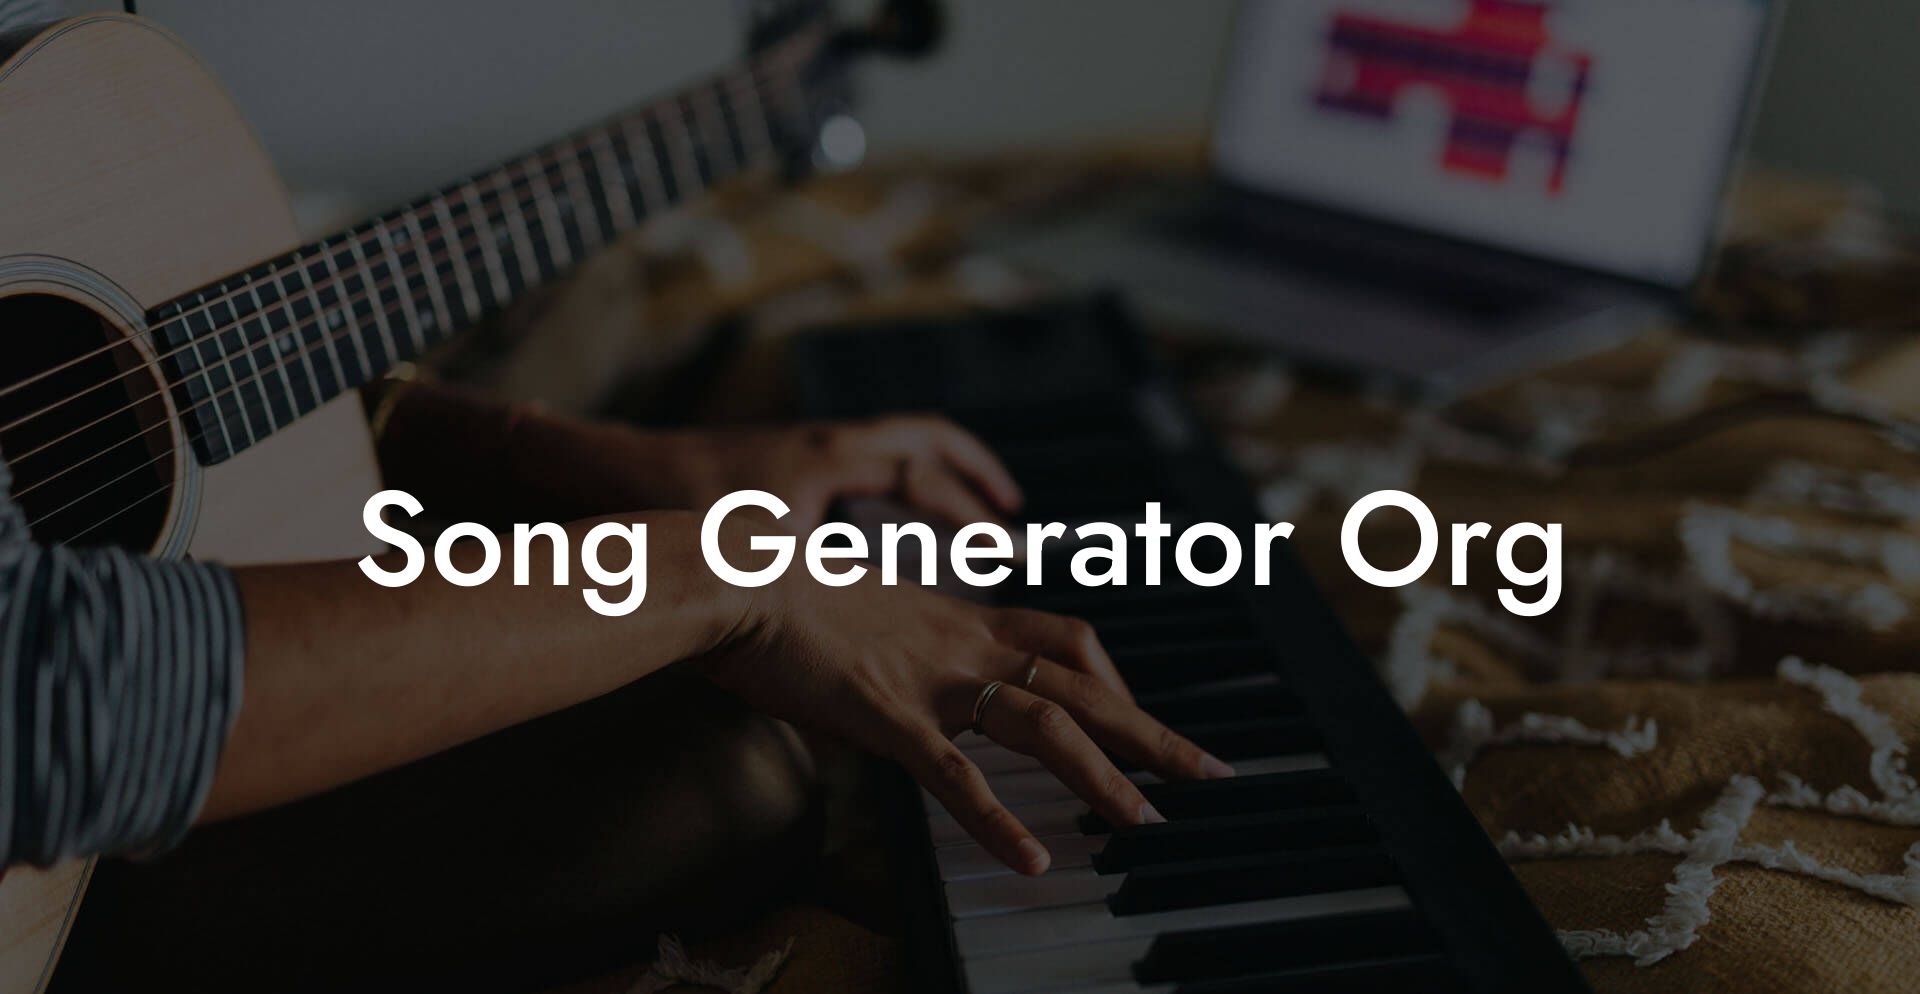 song generator org lyric assistant